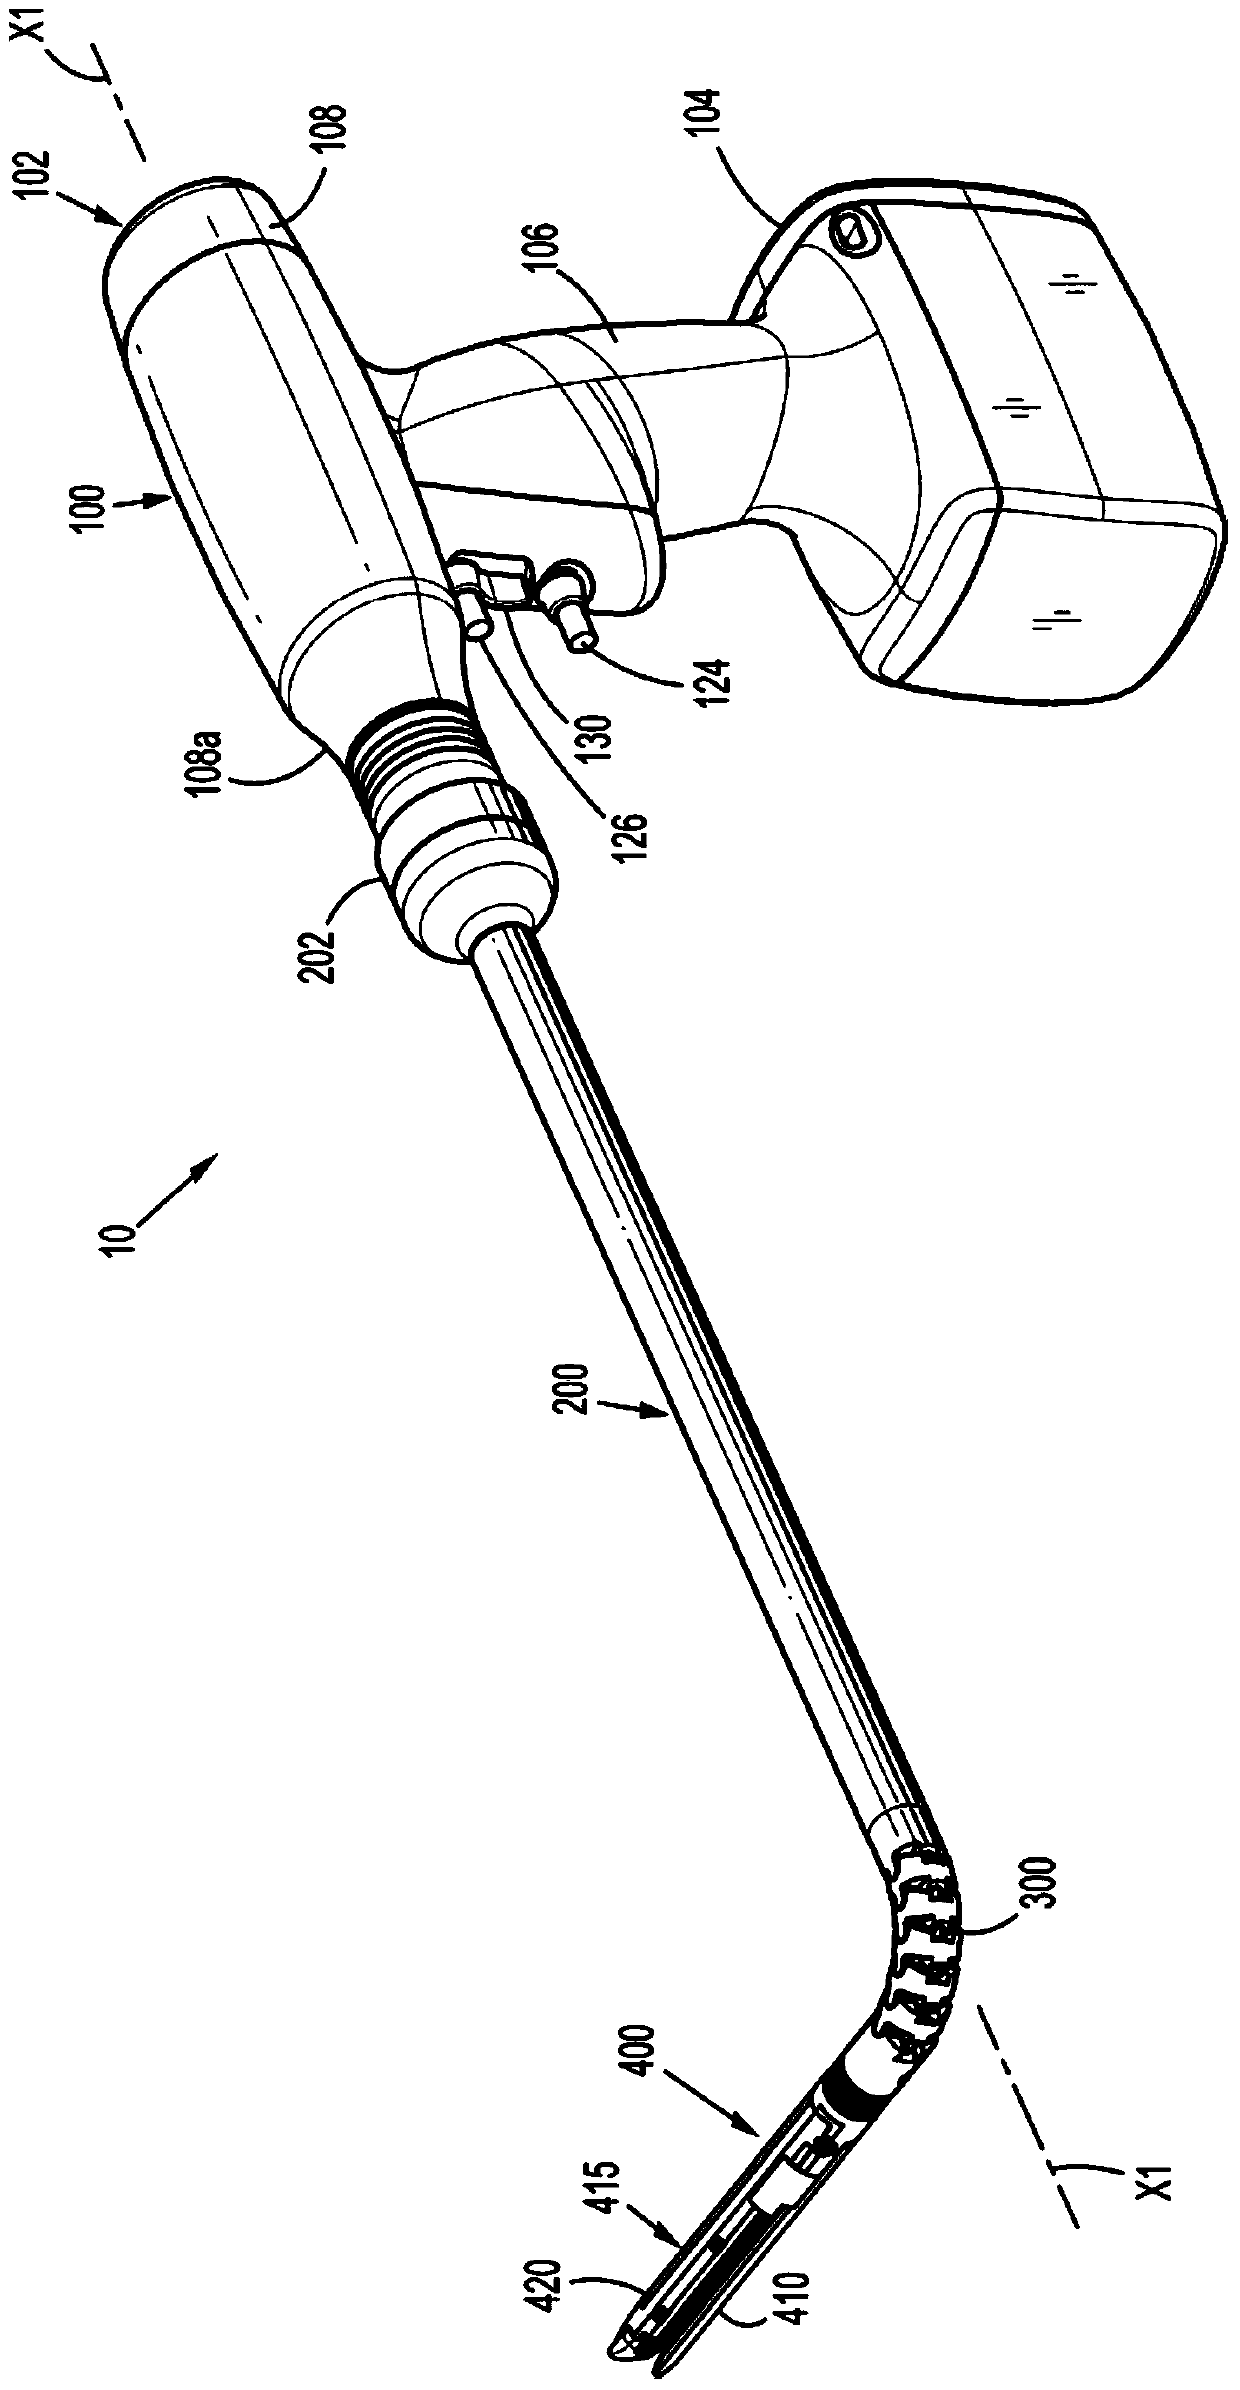 Composite drive beam for surgical anastomosis